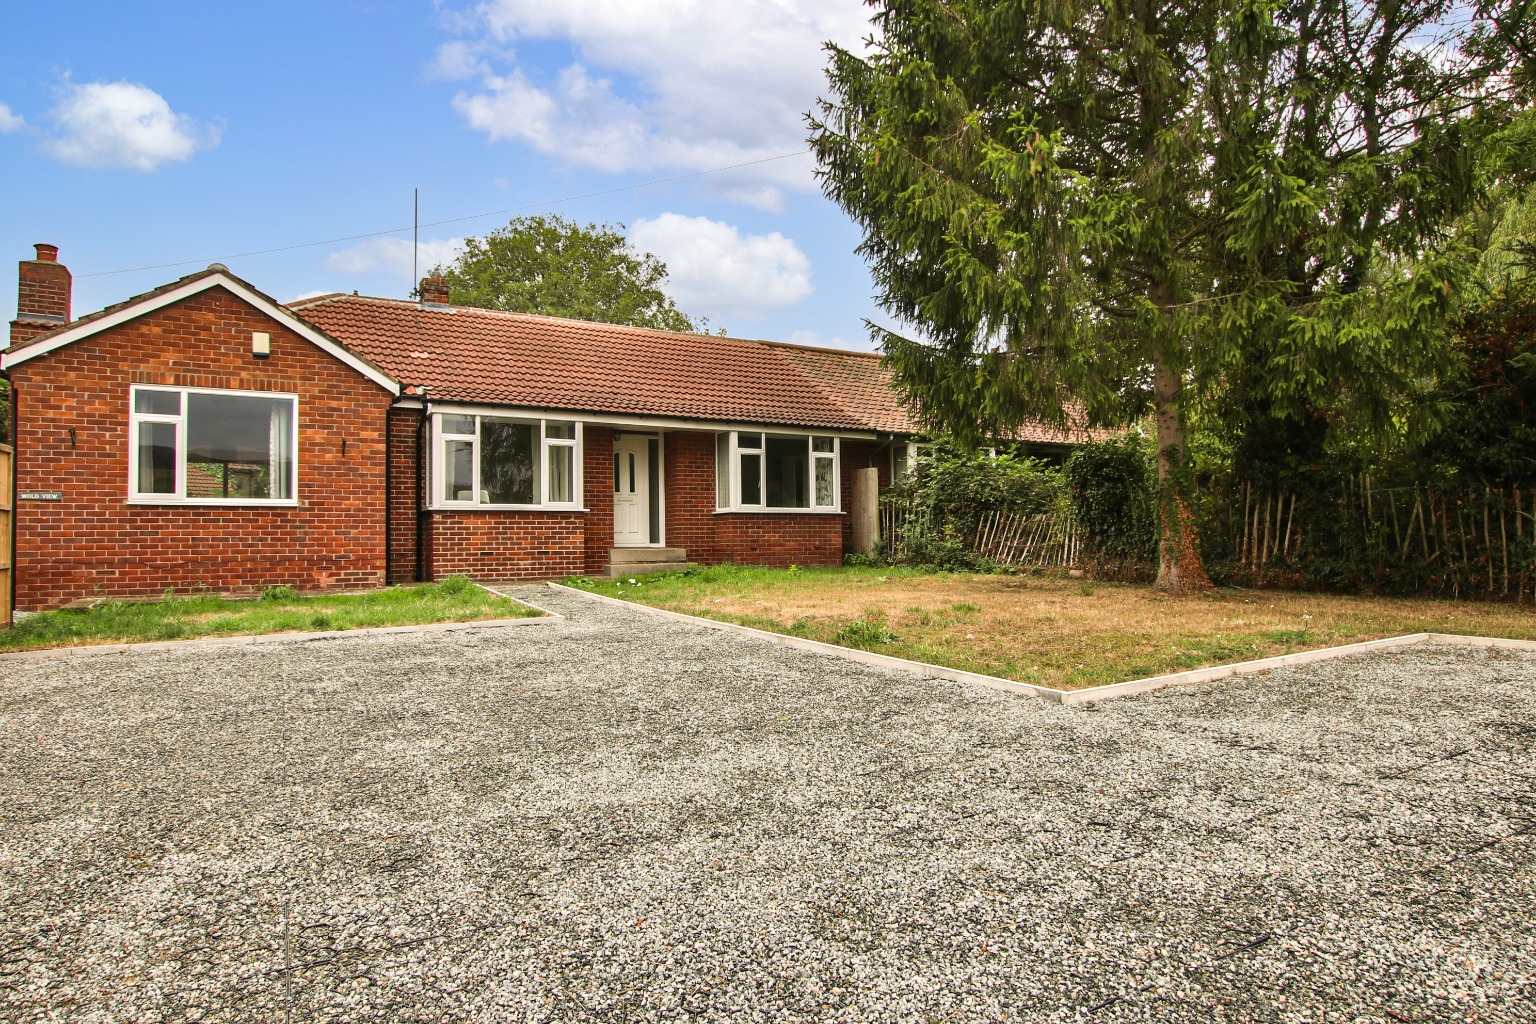 3 bed semi-detached bungalow for sale in Little Wold Lane, Brough, HU15